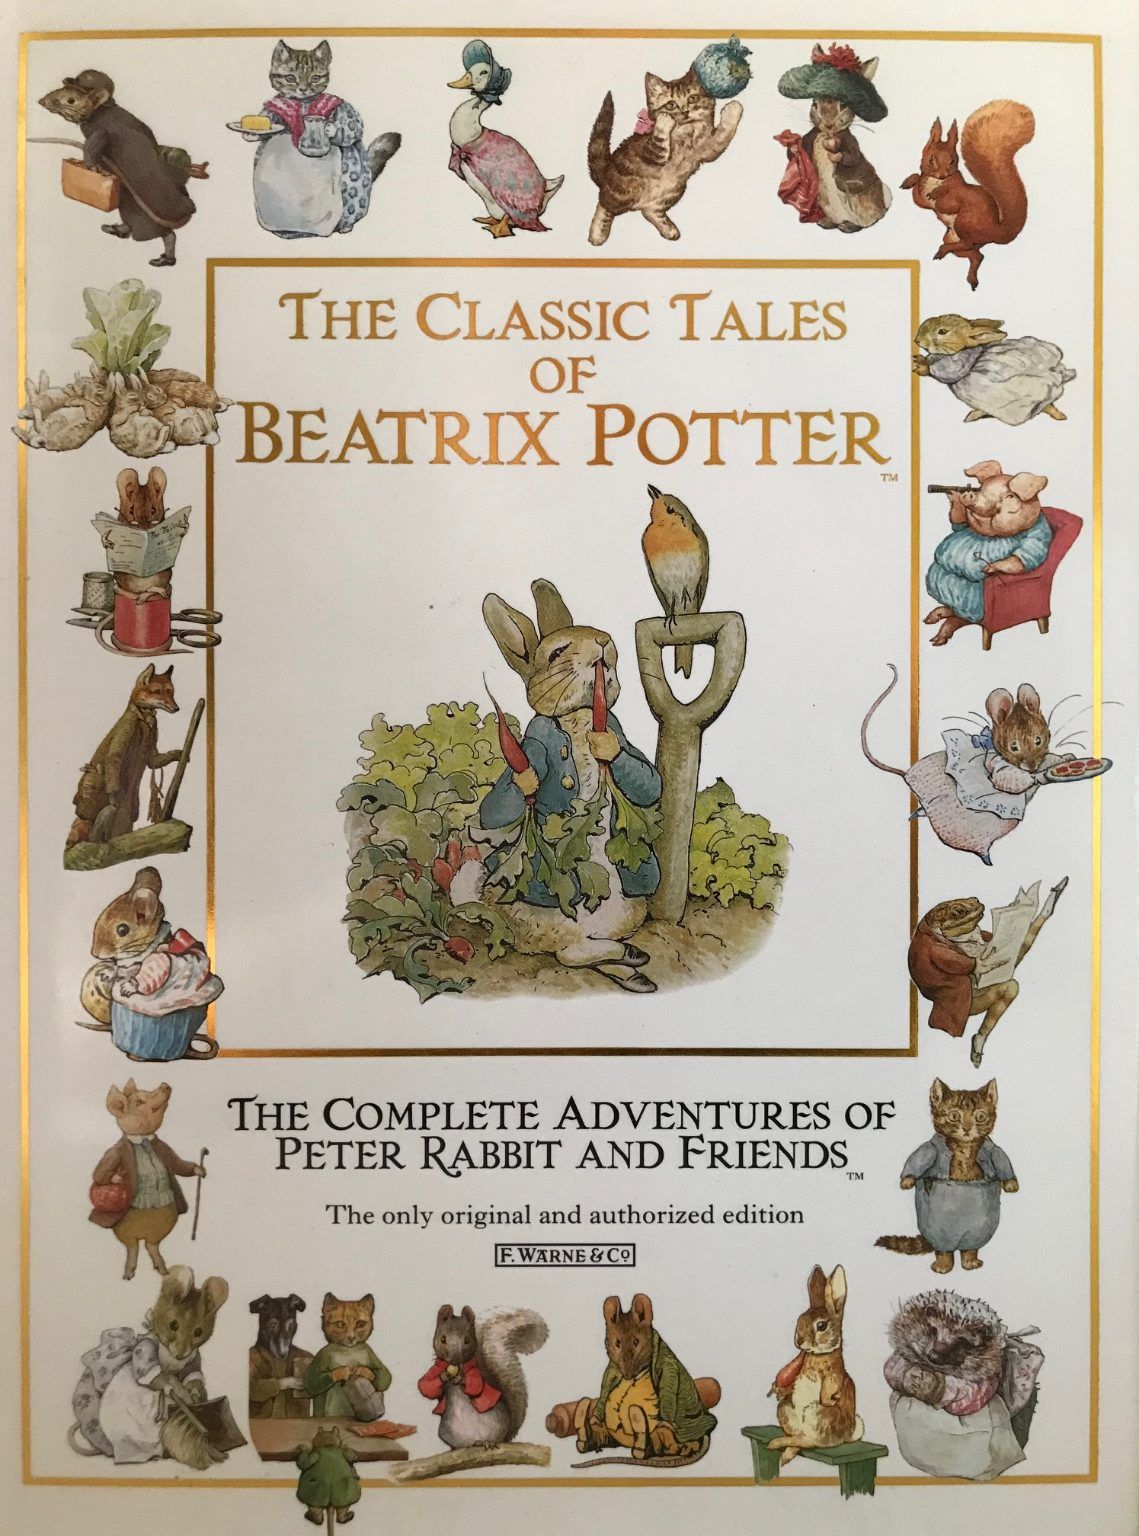 THE CLASSIC TALES OF BEATRIX POTTER: The Adventures of Peter Rabbit and Friends